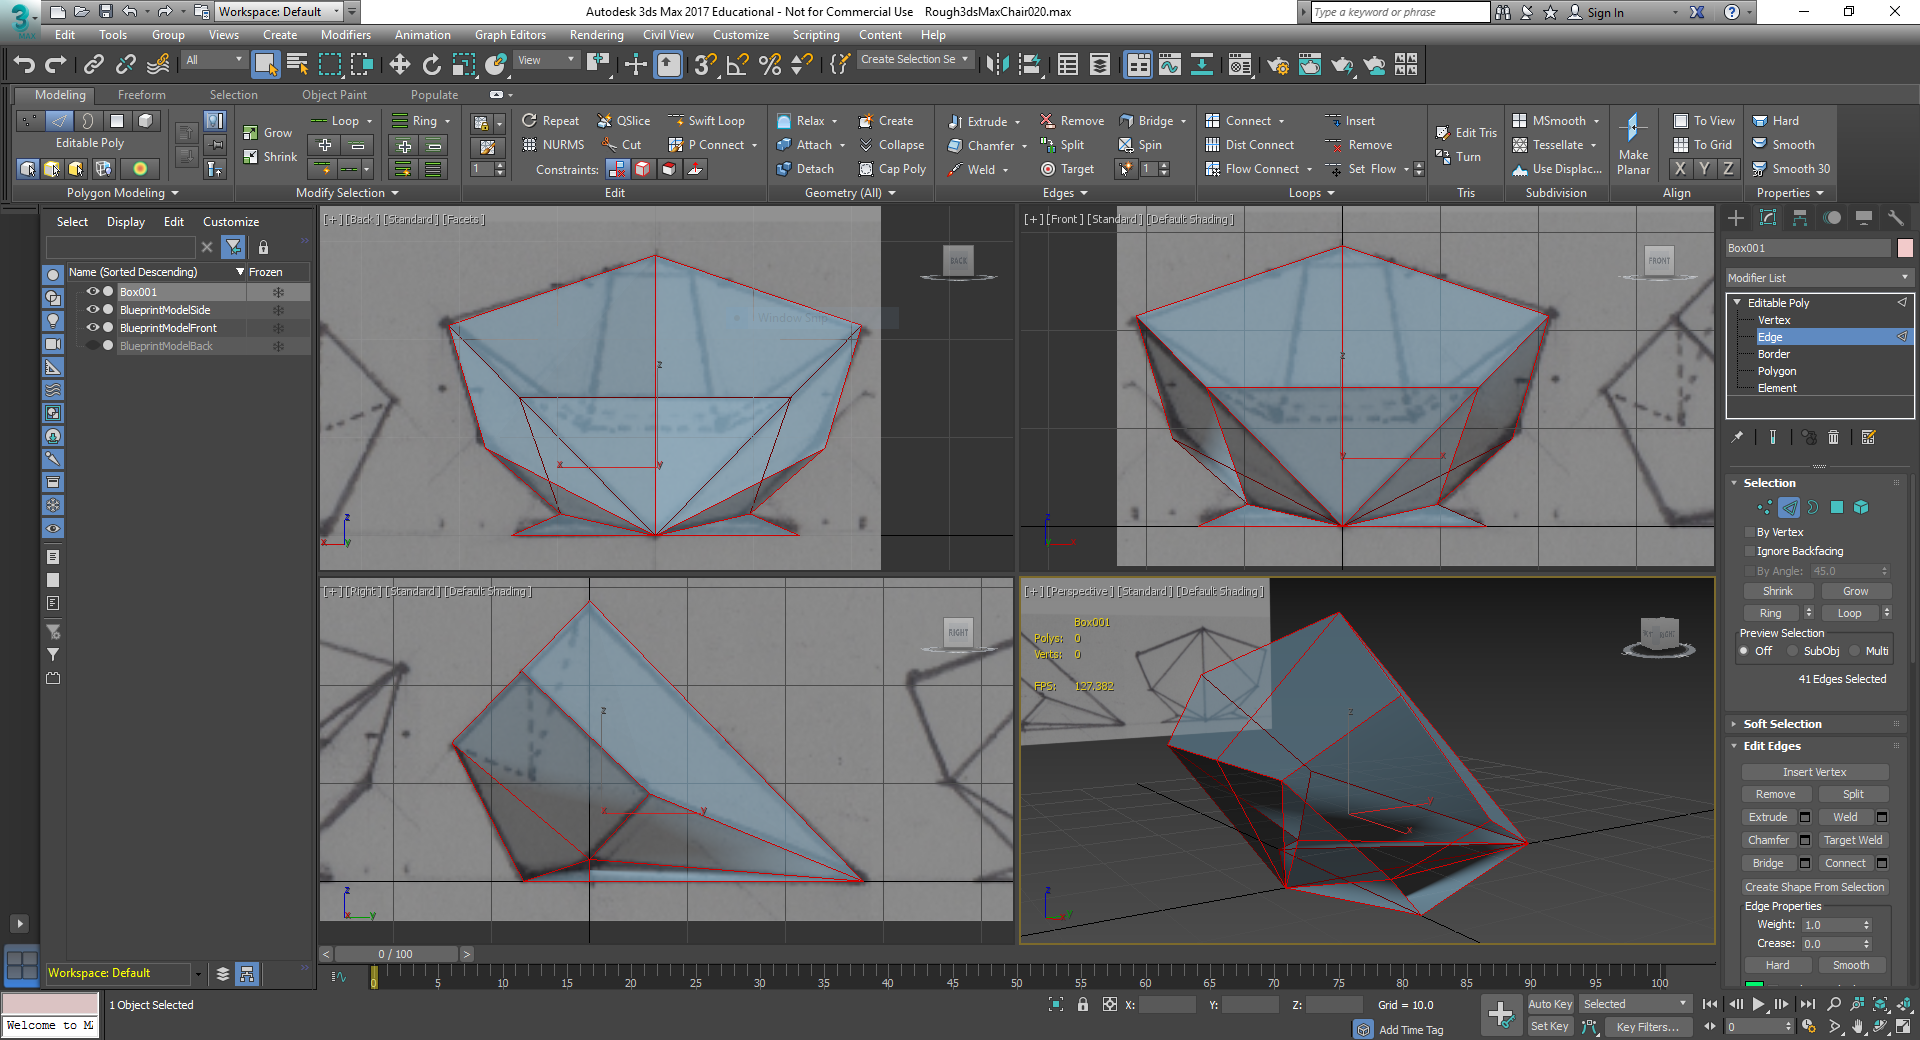 Is 3Ds Max Better Than Maya For Game Development? - Unity Forum